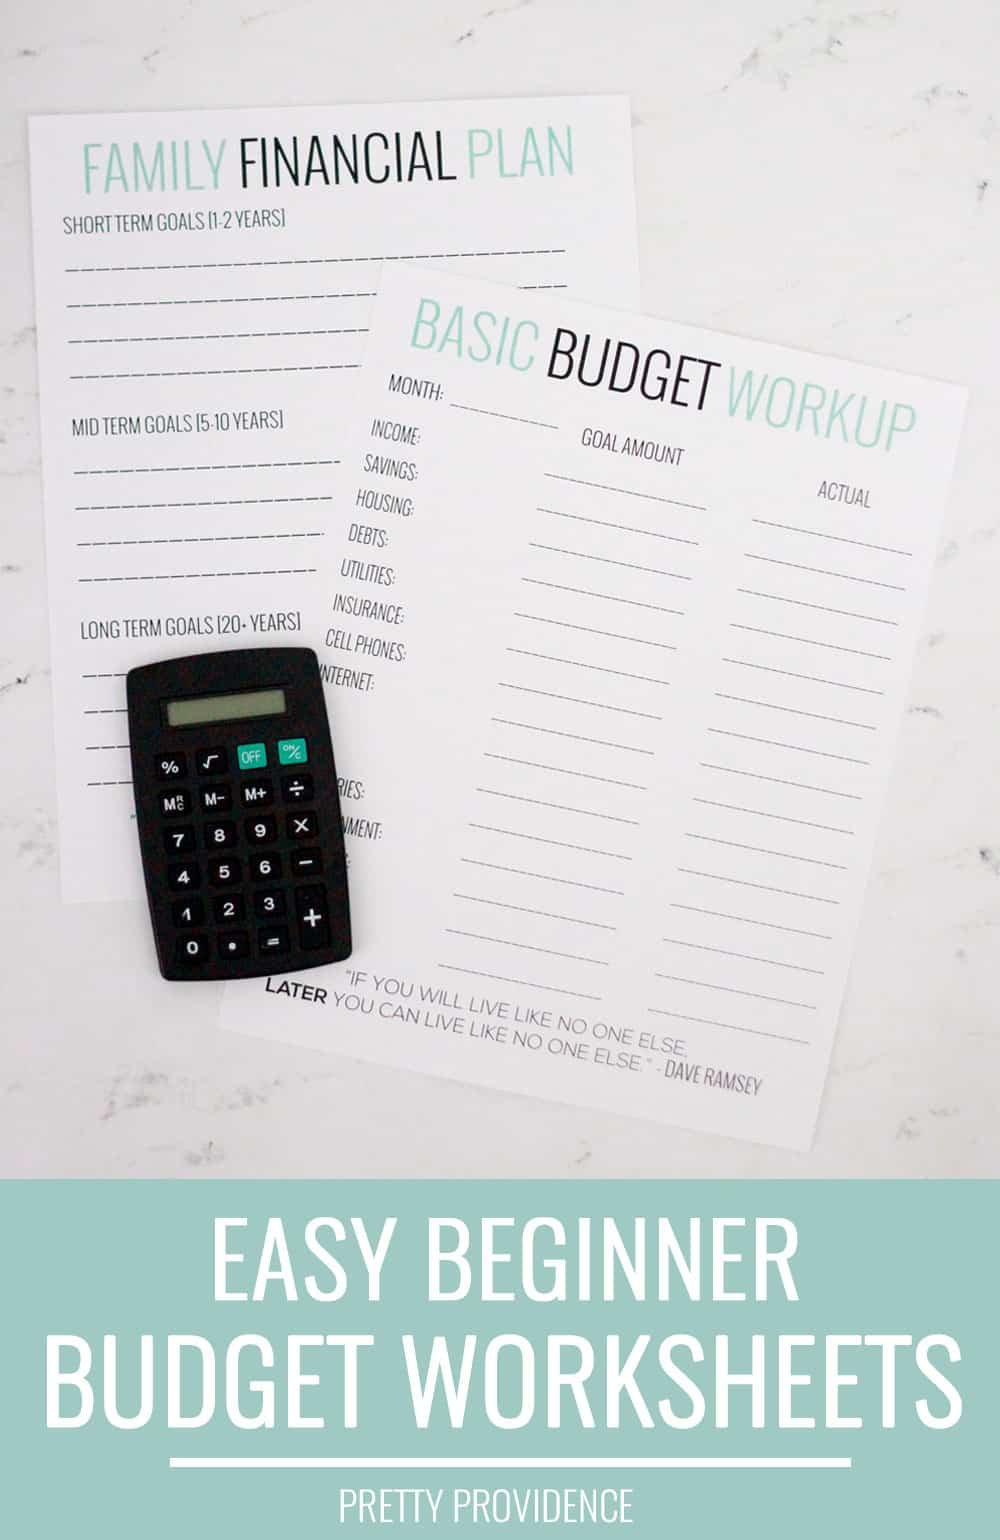 Basic Budgeting With Free Worksheets To Get You Started For Budgeting For Beginners Worksheets